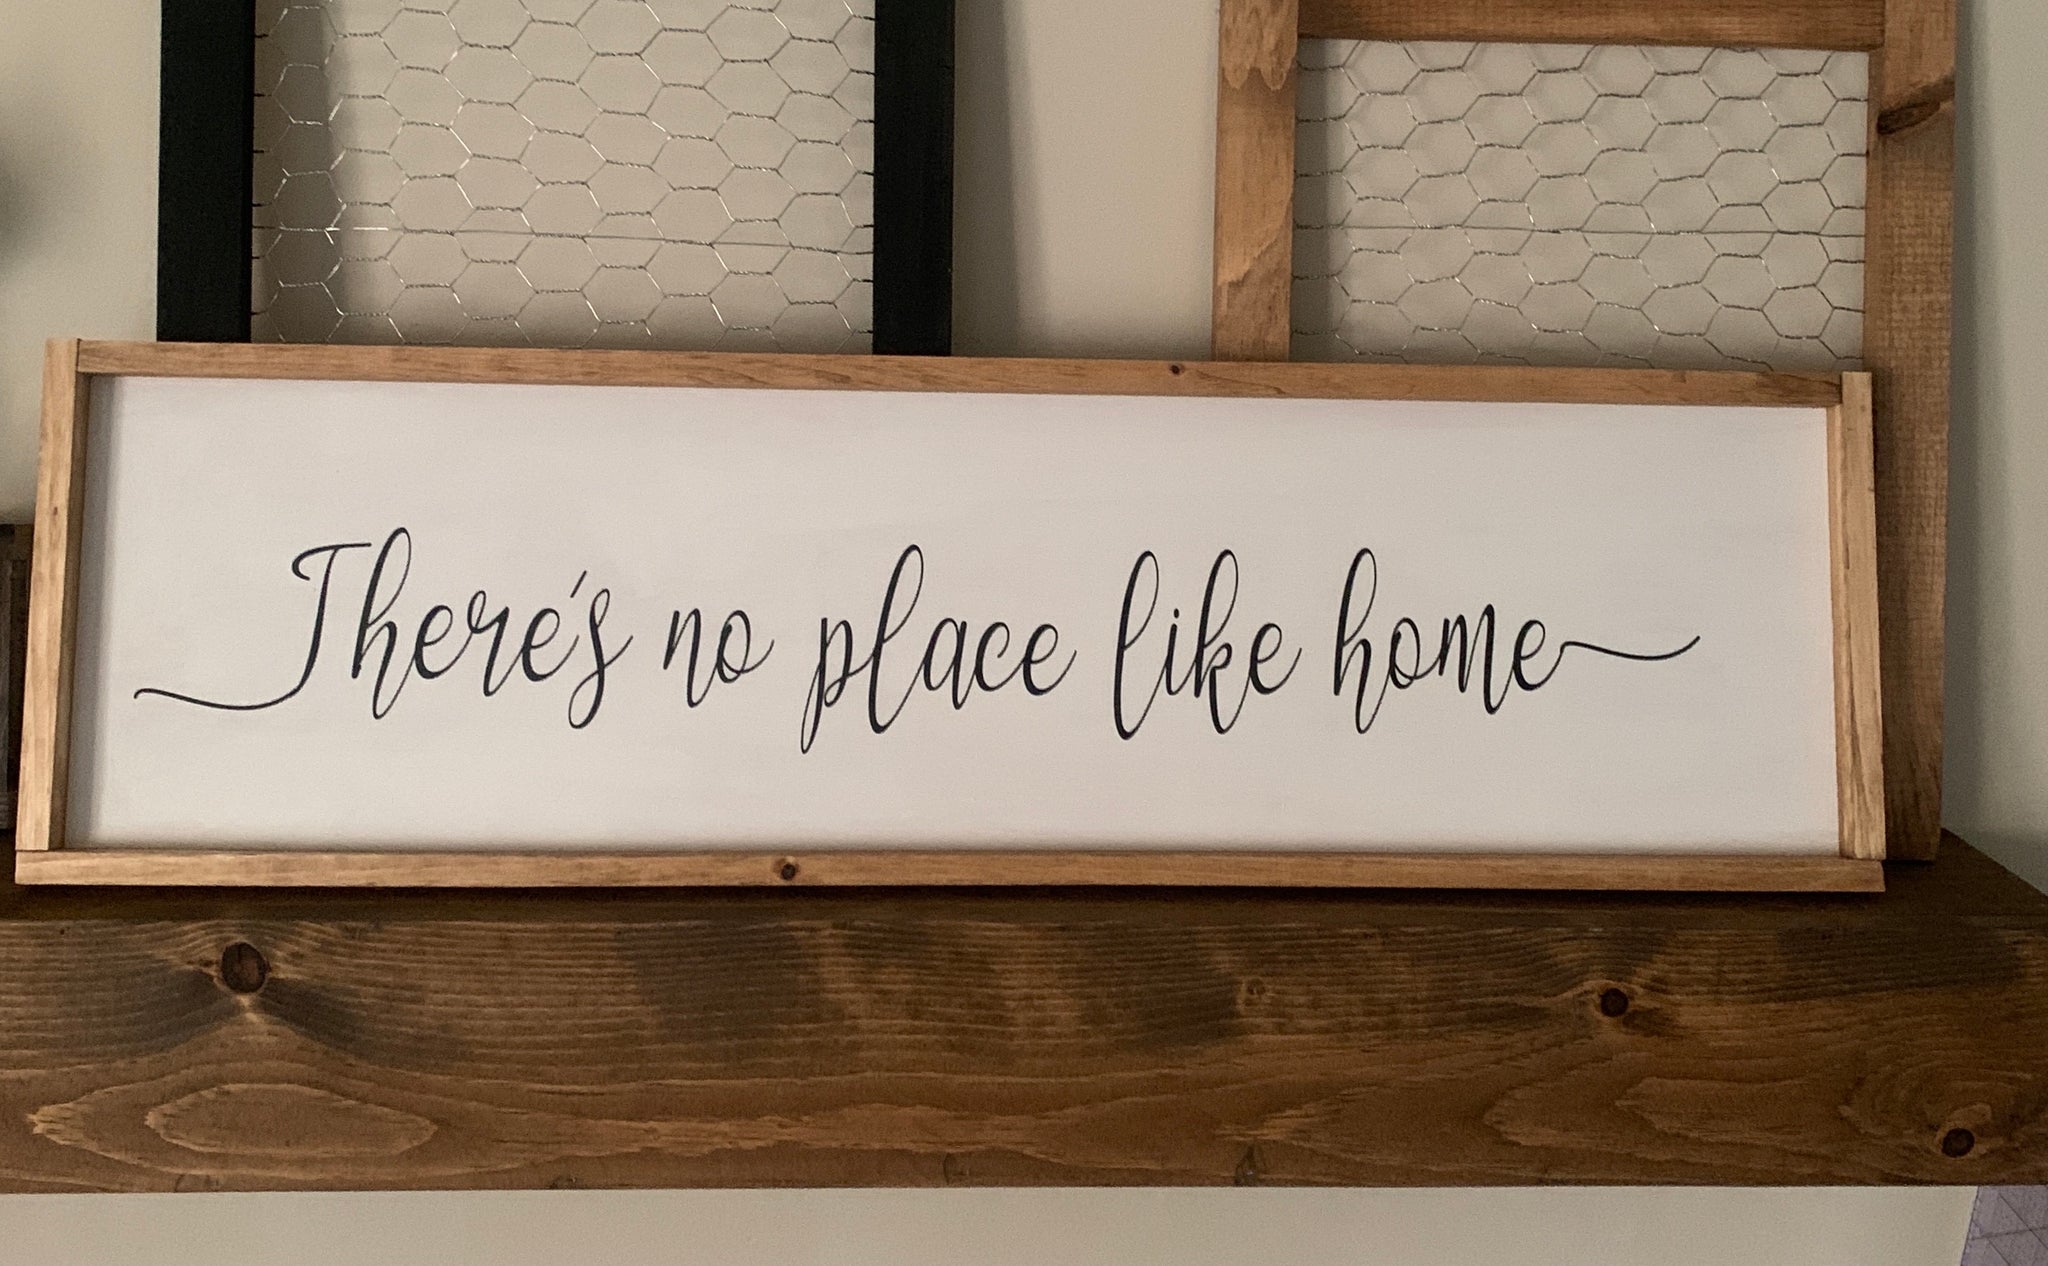 There’s no place like home -